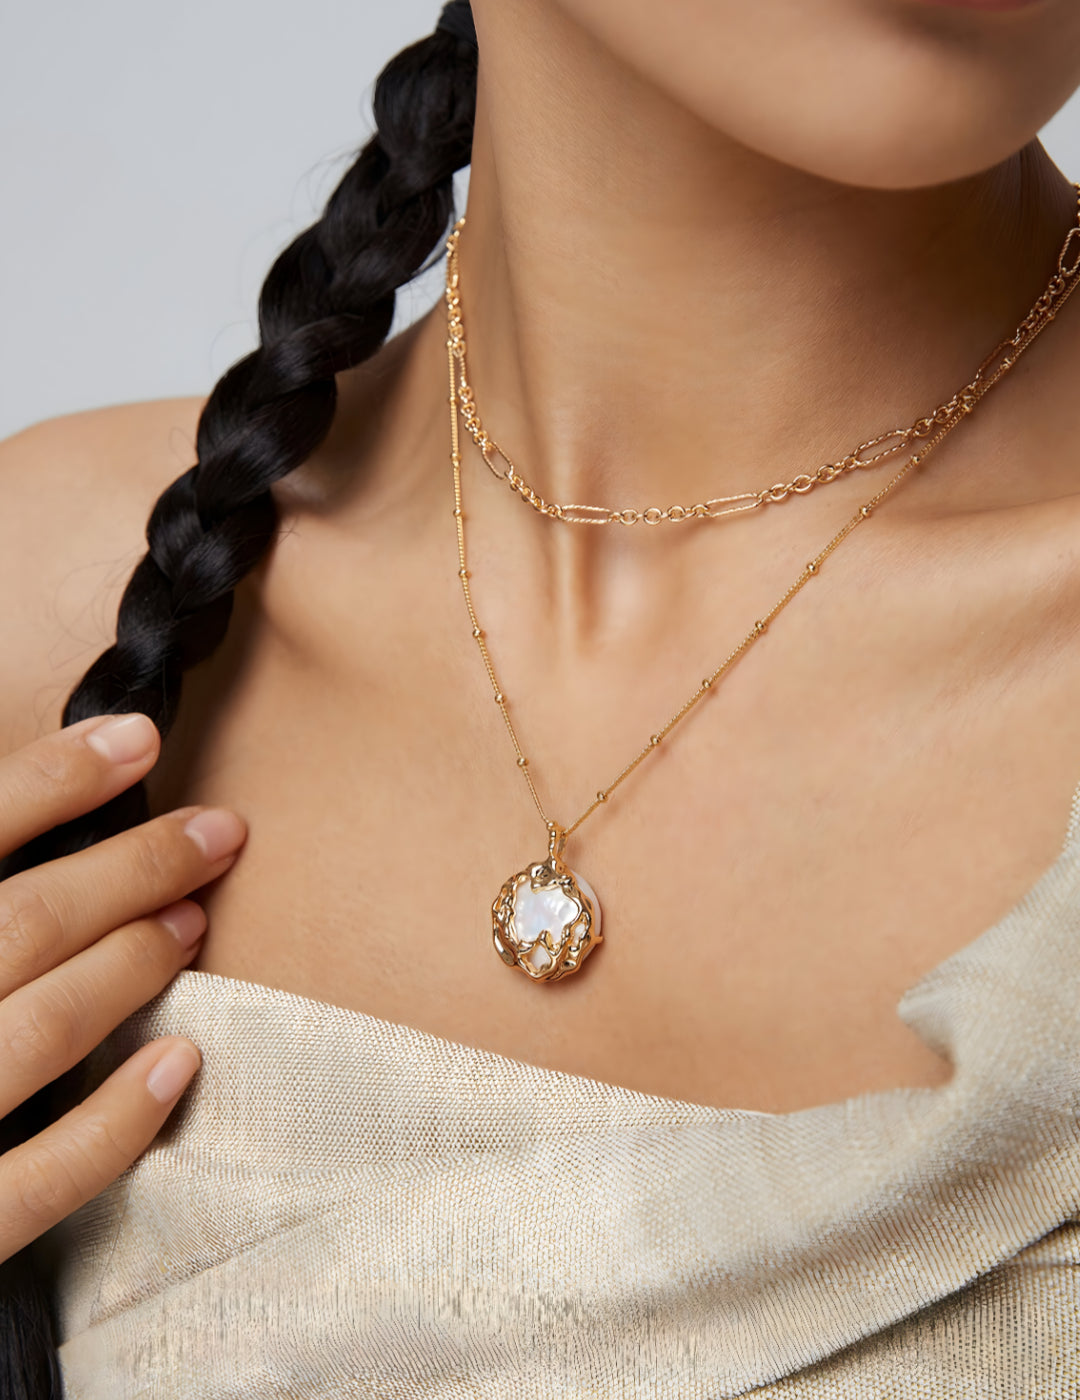 Pearl Luminance Adjustable Necklaces - Lustrous Elegance - S925 sterling silver with 18K Gold Vermeil - a timeless piece that adds a touch of elegance to any outfit.